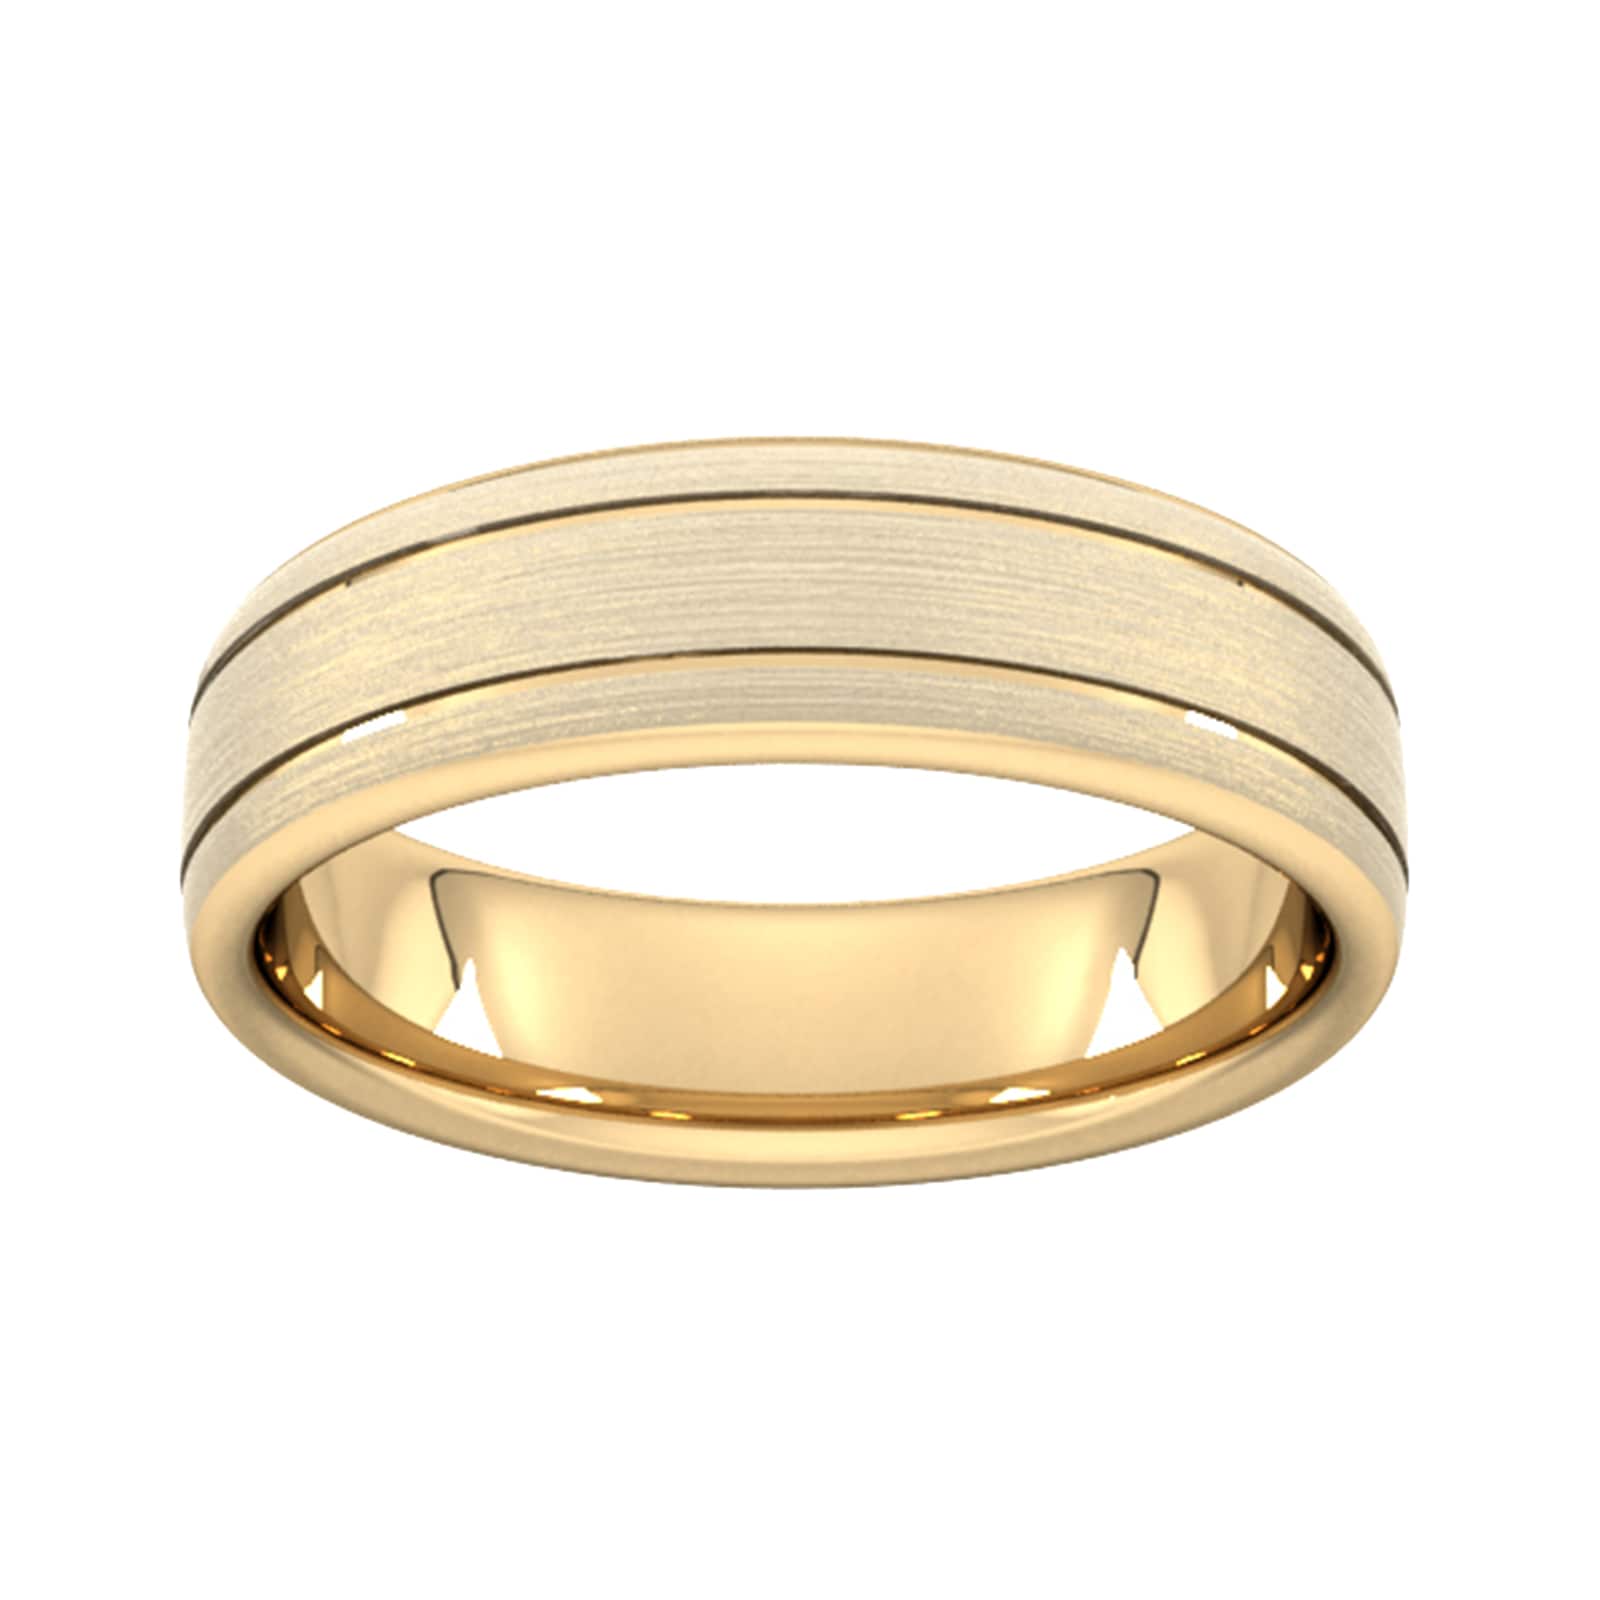 6mm Slight Court Standard Matt Finish With Double Grooves Wedding Ring In 9 Carat Yellow Gold - Ring Size V